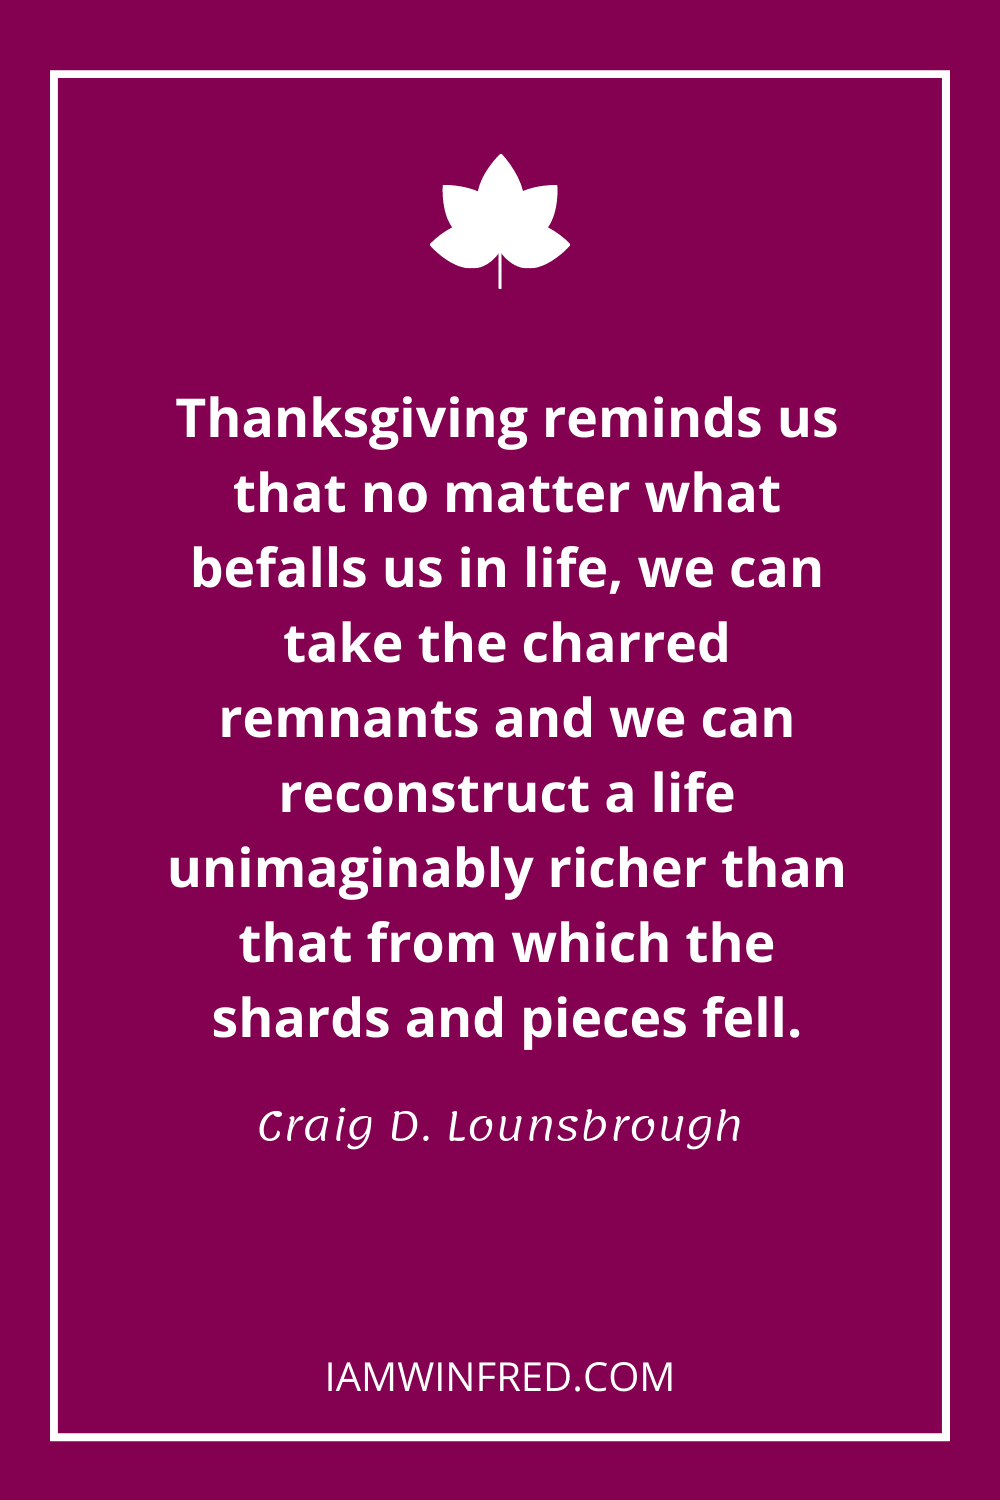 Thanksgiving Reminds Us That No Matter What Befalls Us In Life We Can Take The Charred Remnants And We Can Reconstruct A Life Unimaginably Richer Than That From Which The Shards And Pieces Fell.